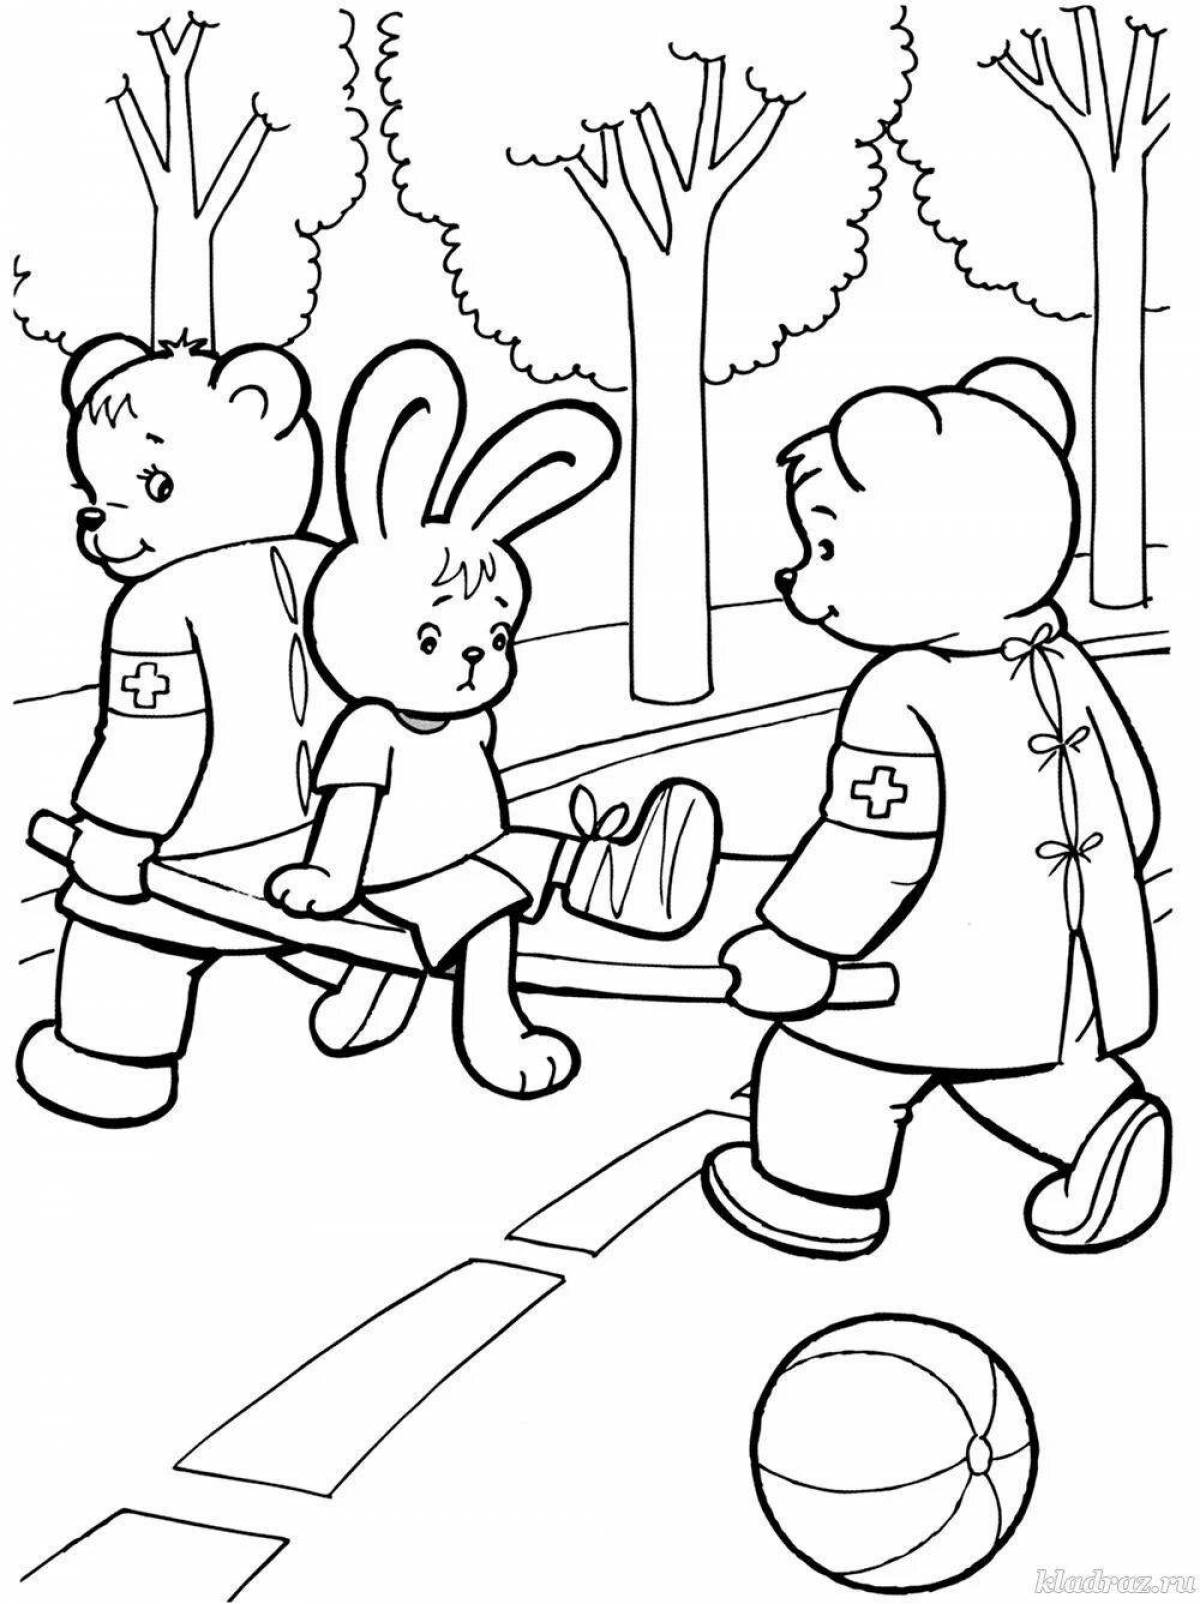 Fun winter safety coloring book for preschoolers